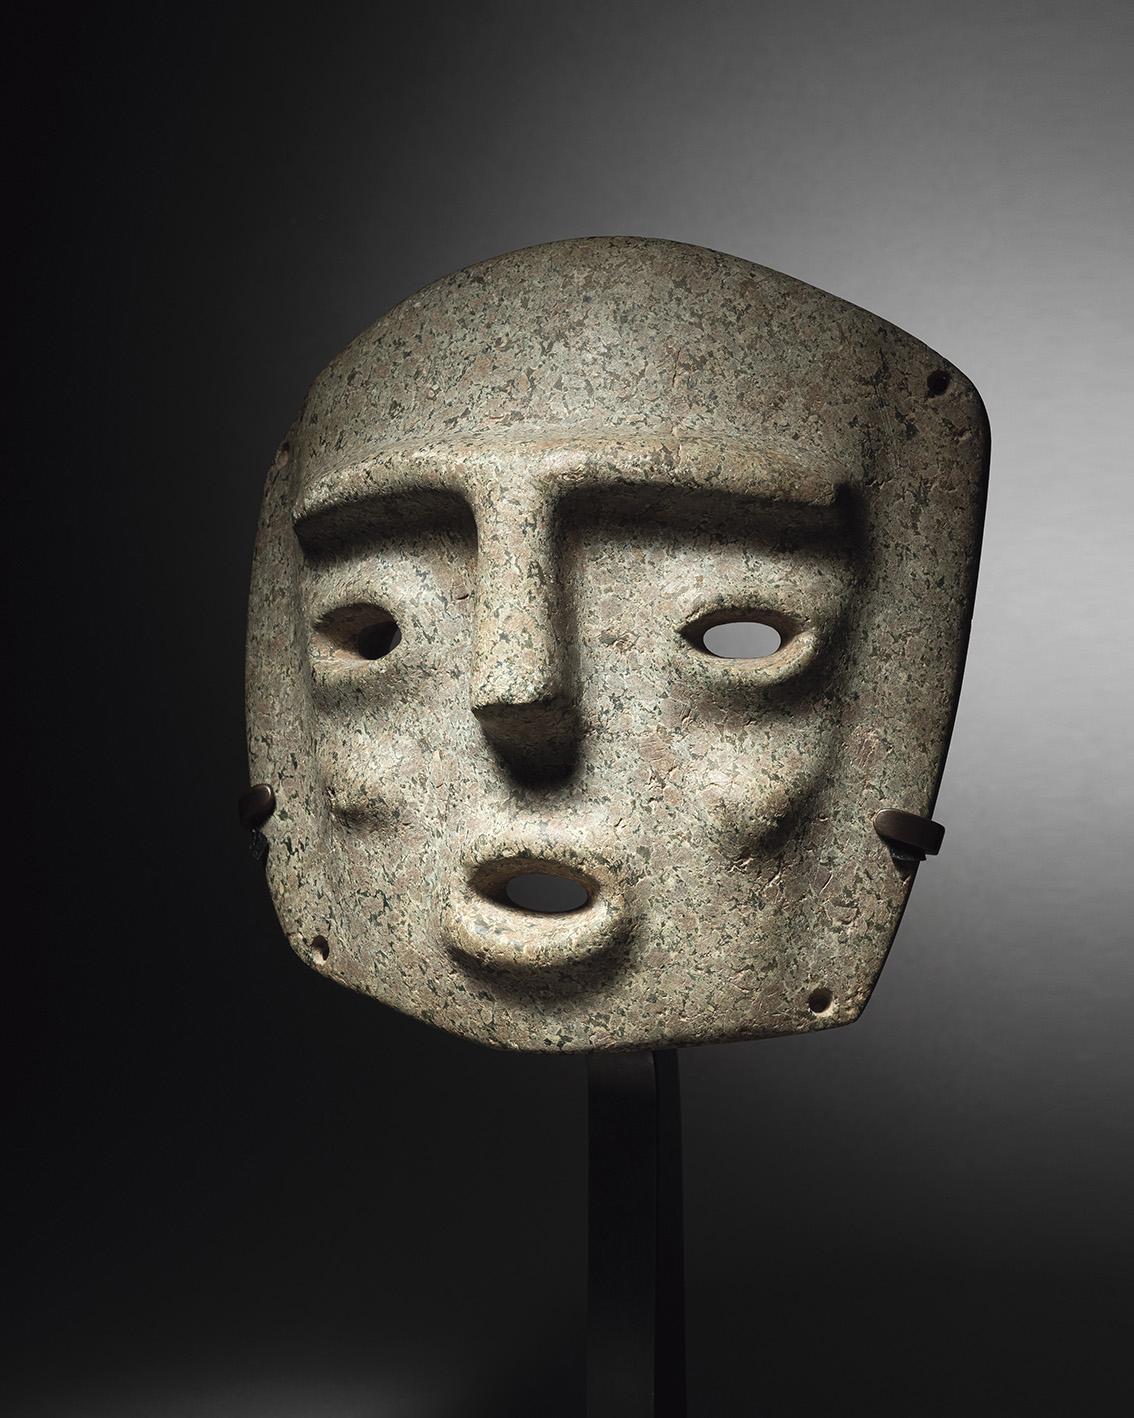 Sacred Objects of Mexico | Gazette Drouot